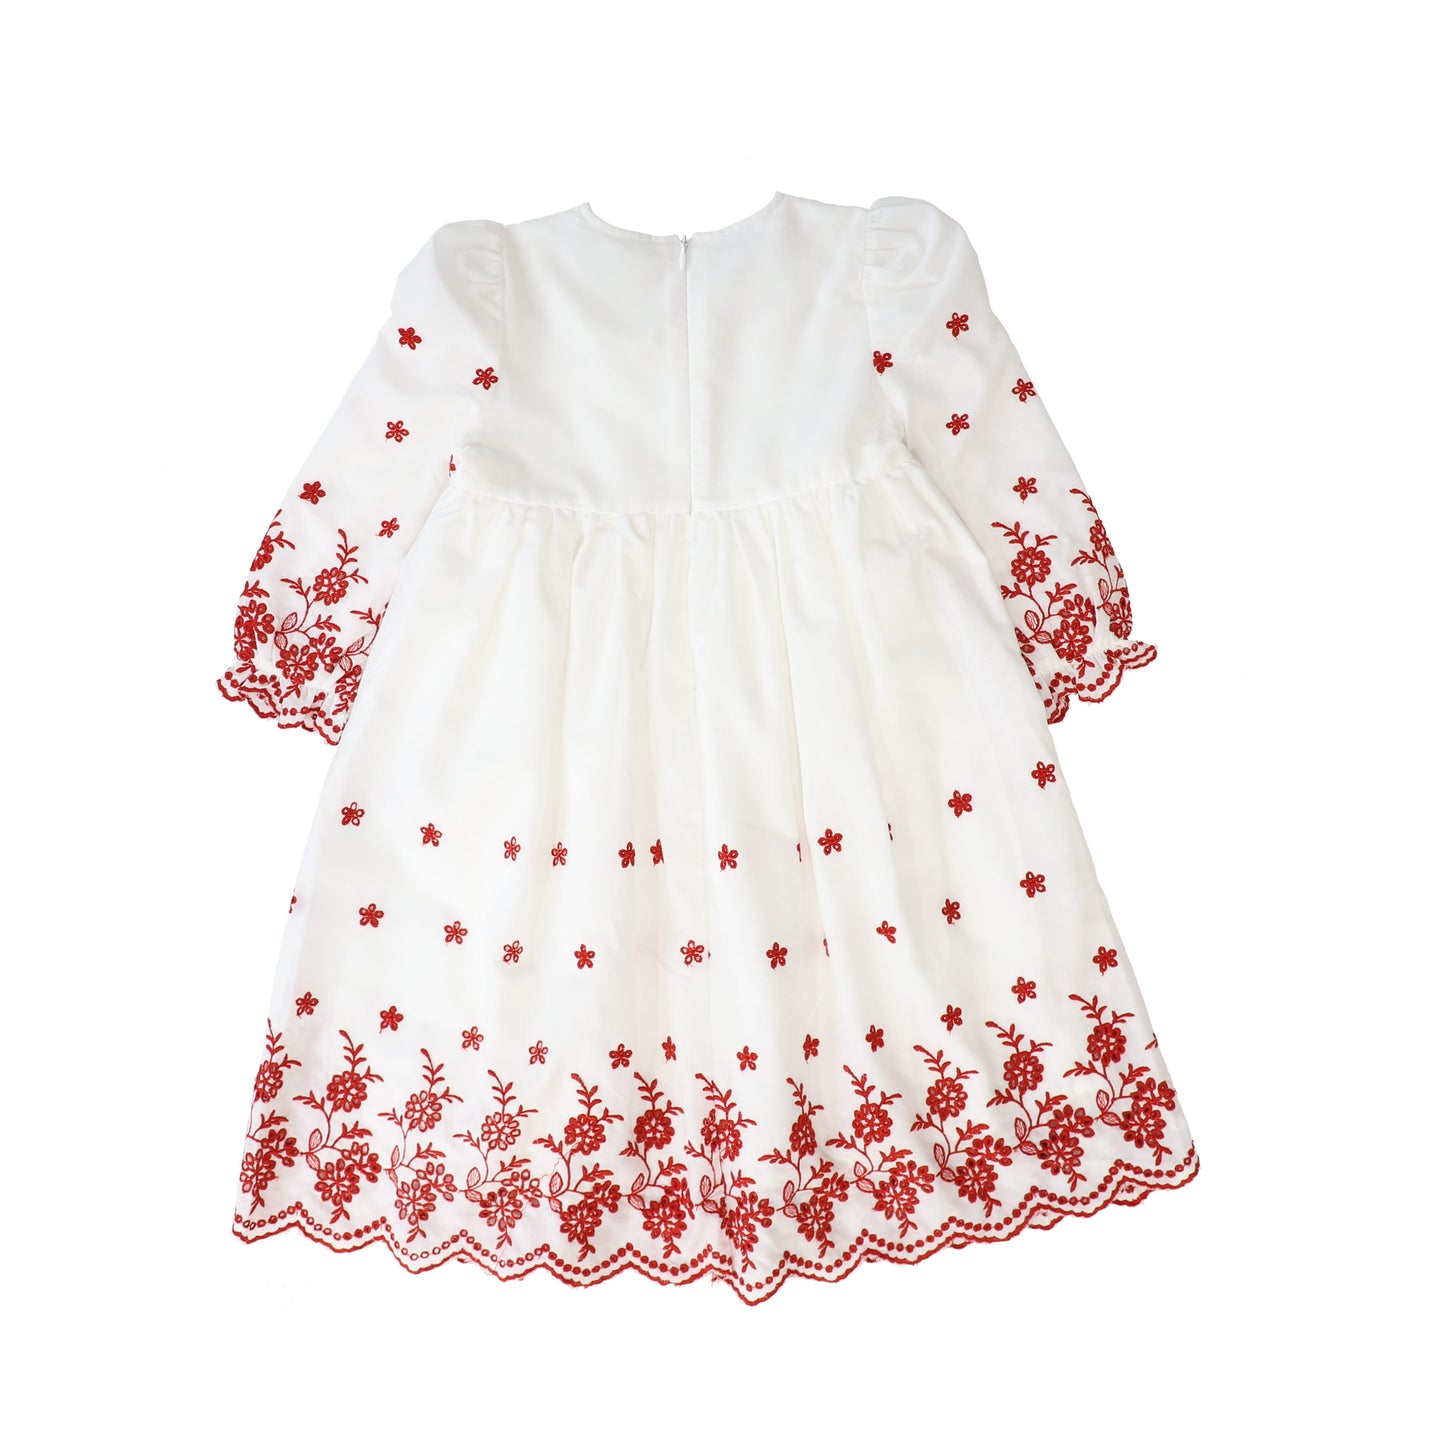 LILOU WHITE/RED EMBROIDERED EYELET HIGH WAISTED DRESS